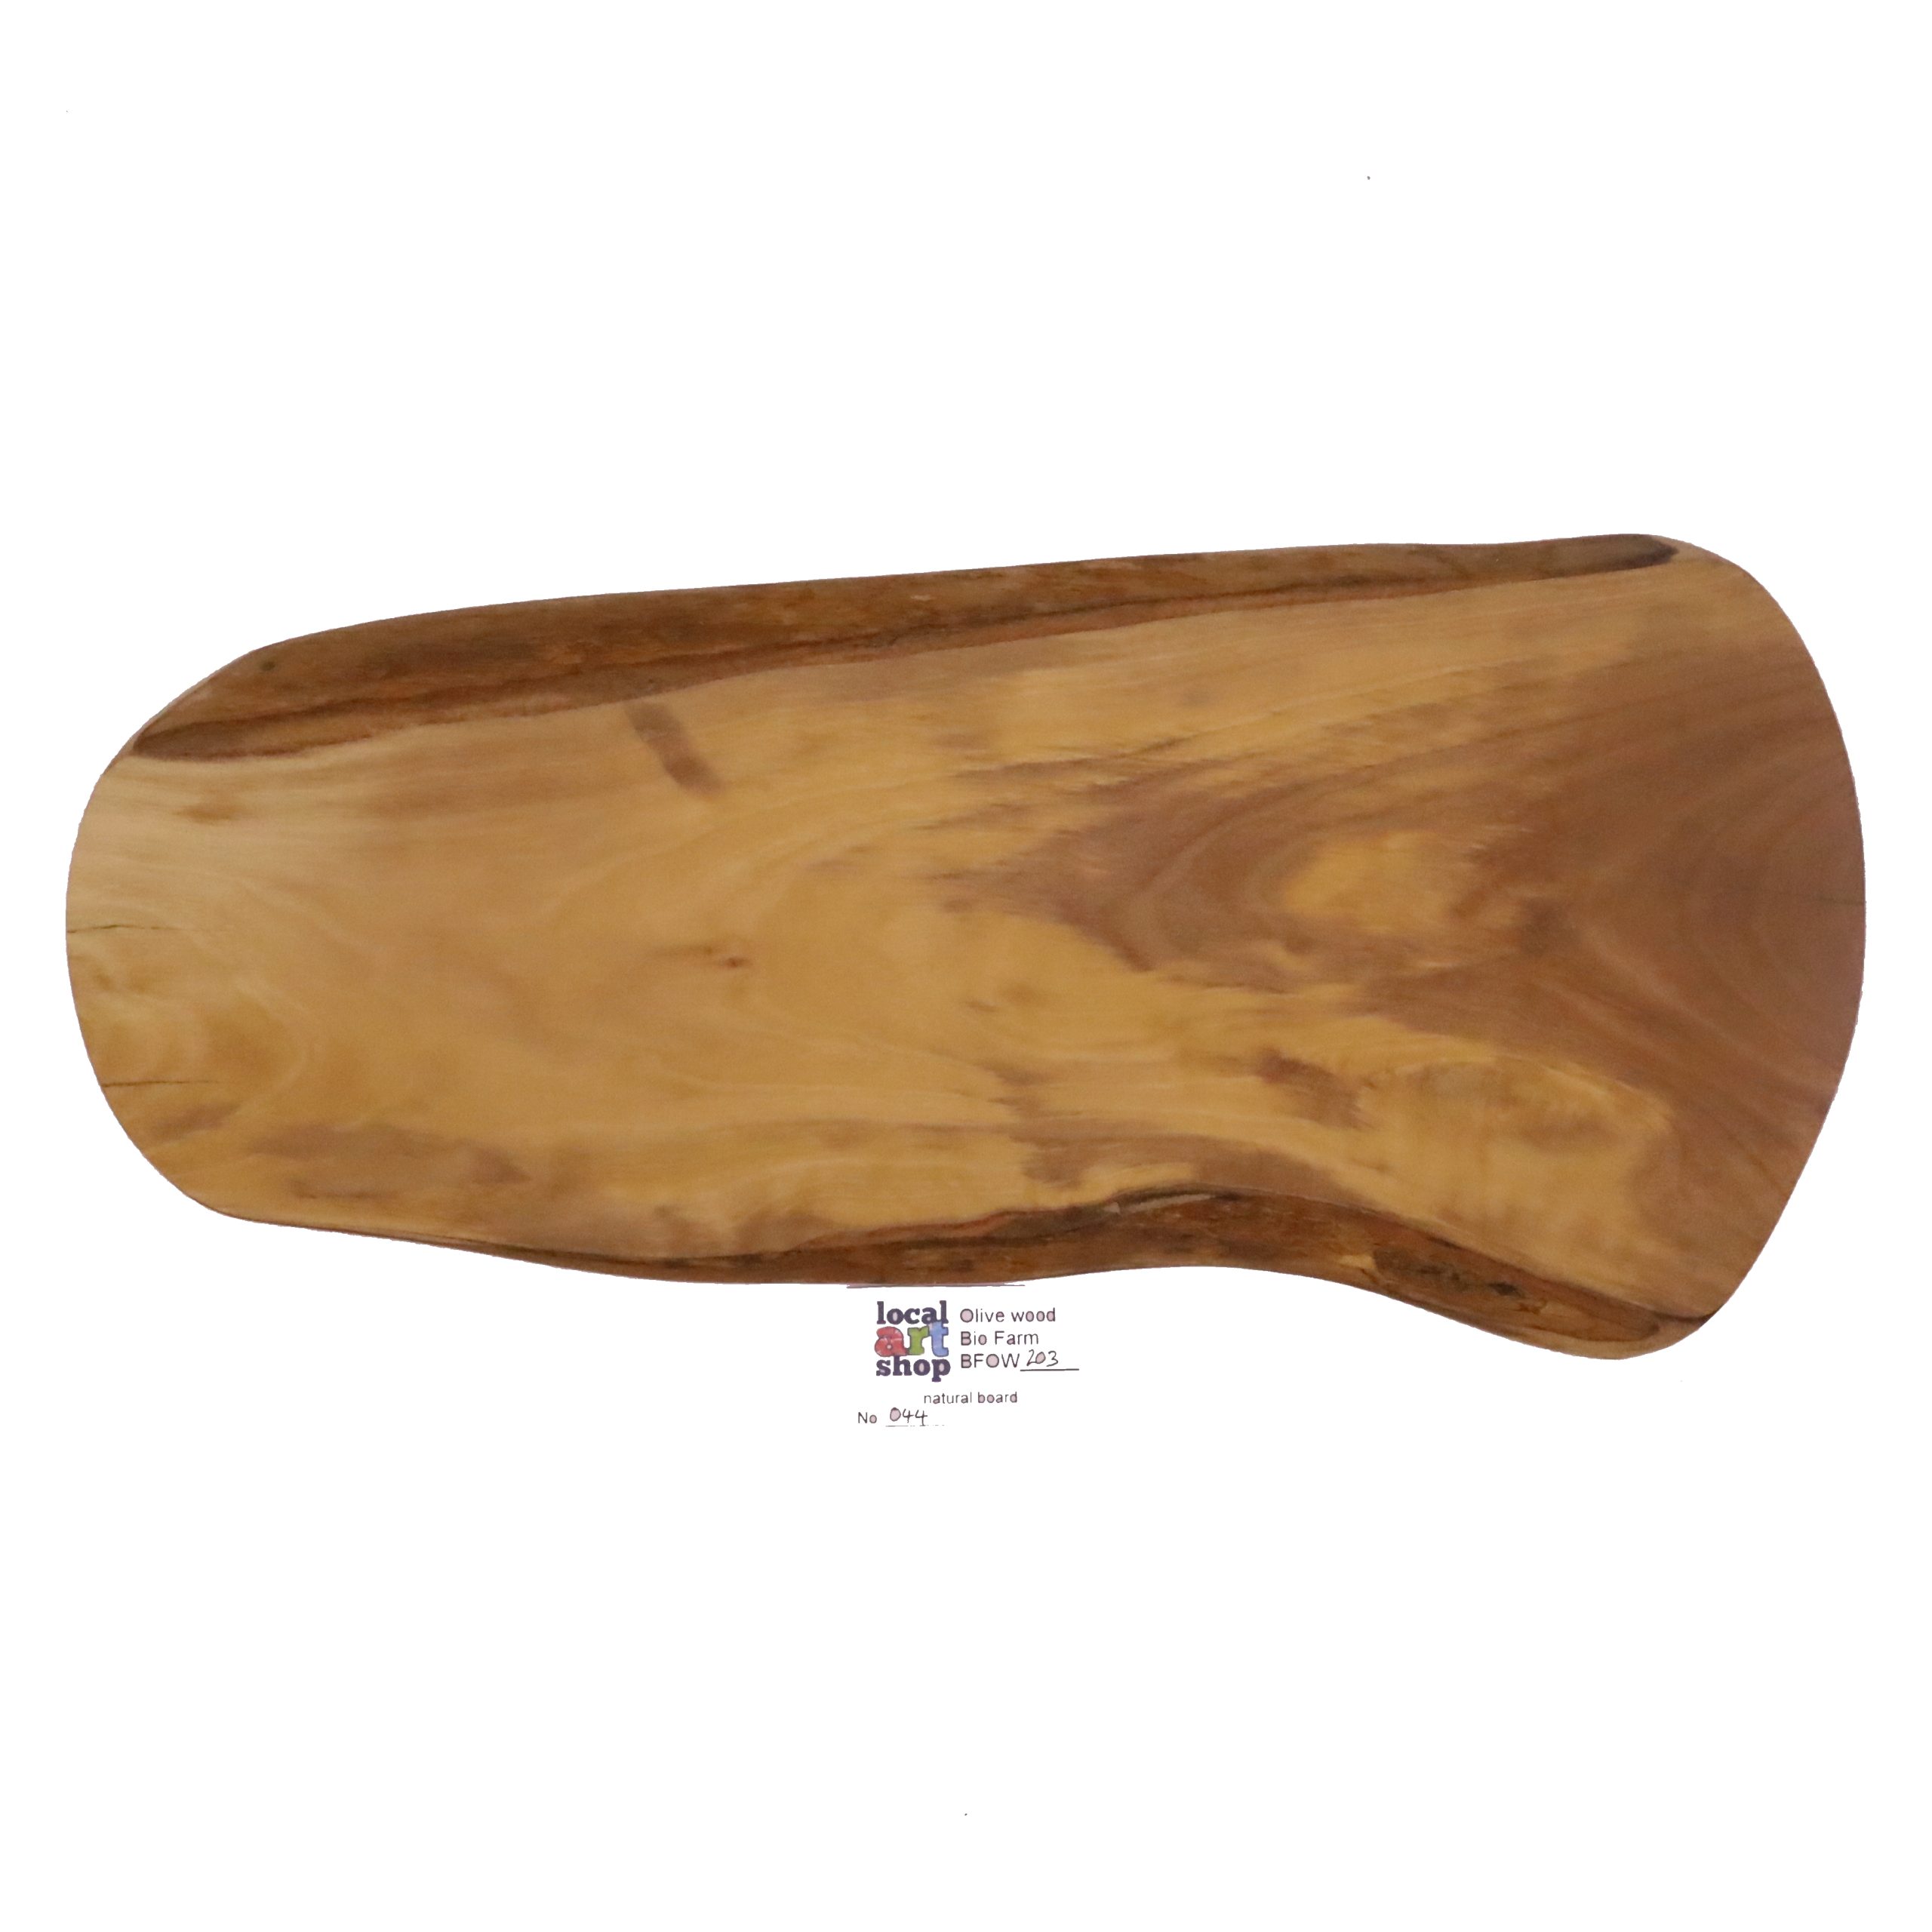 Olive wood natural chopping service board standard 44 cm to 48 cm long